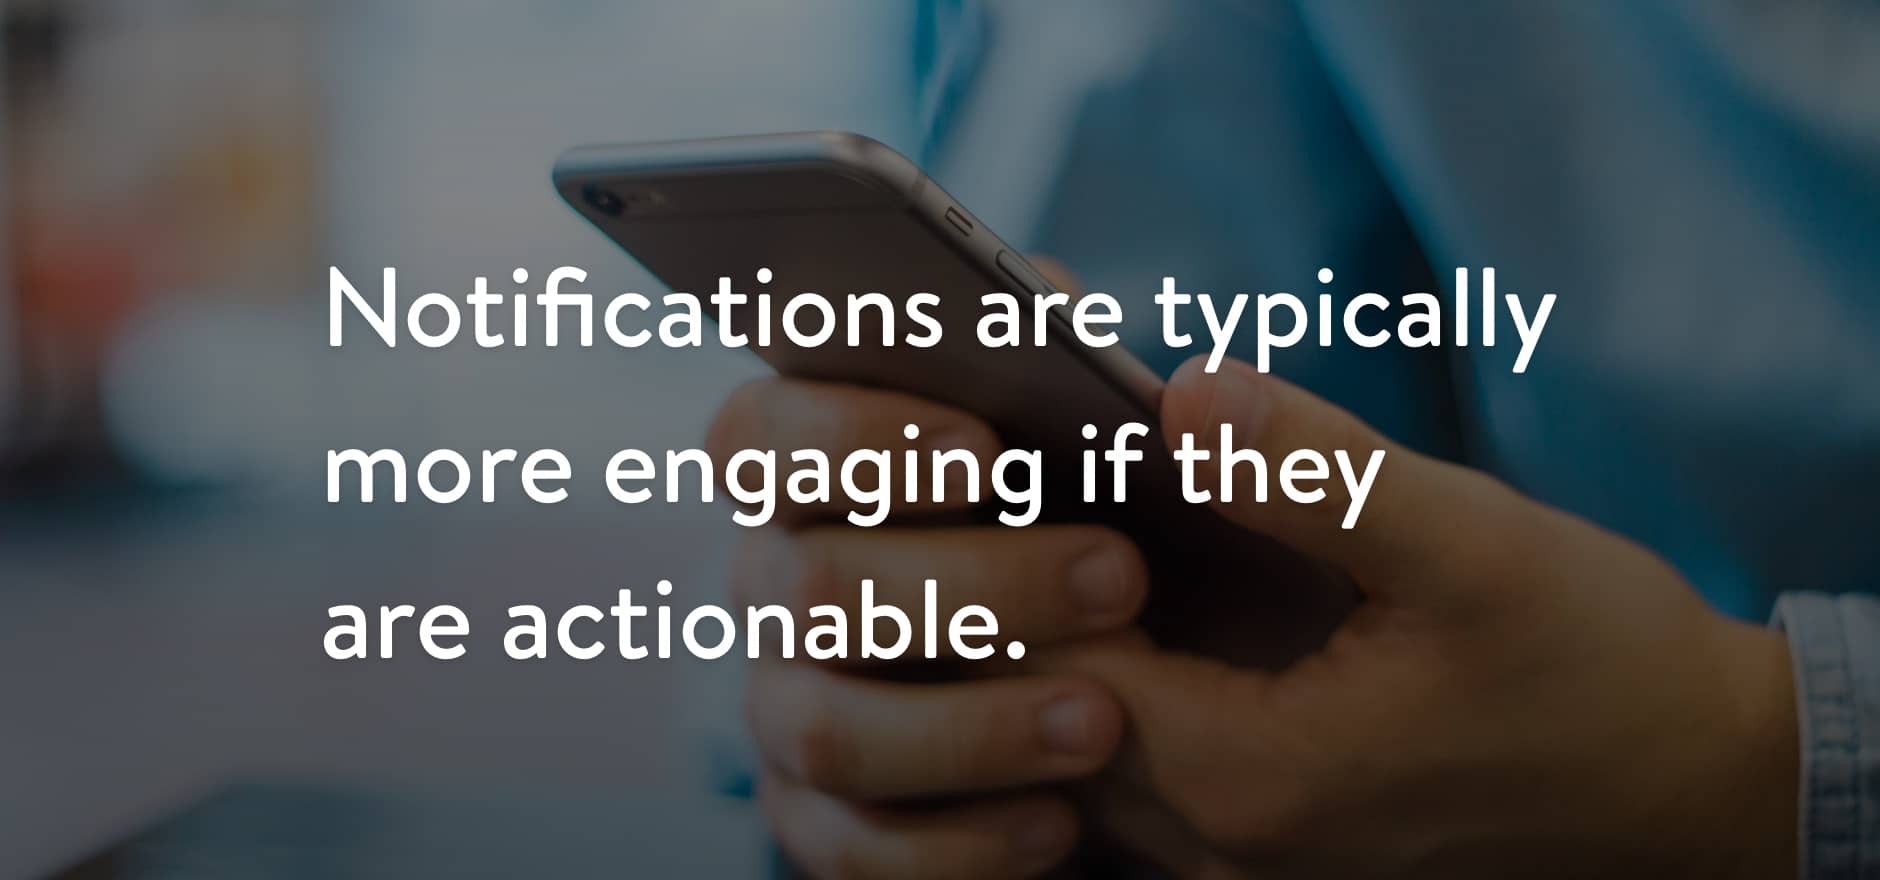 Notifications are typically more engaging if they are actionable.